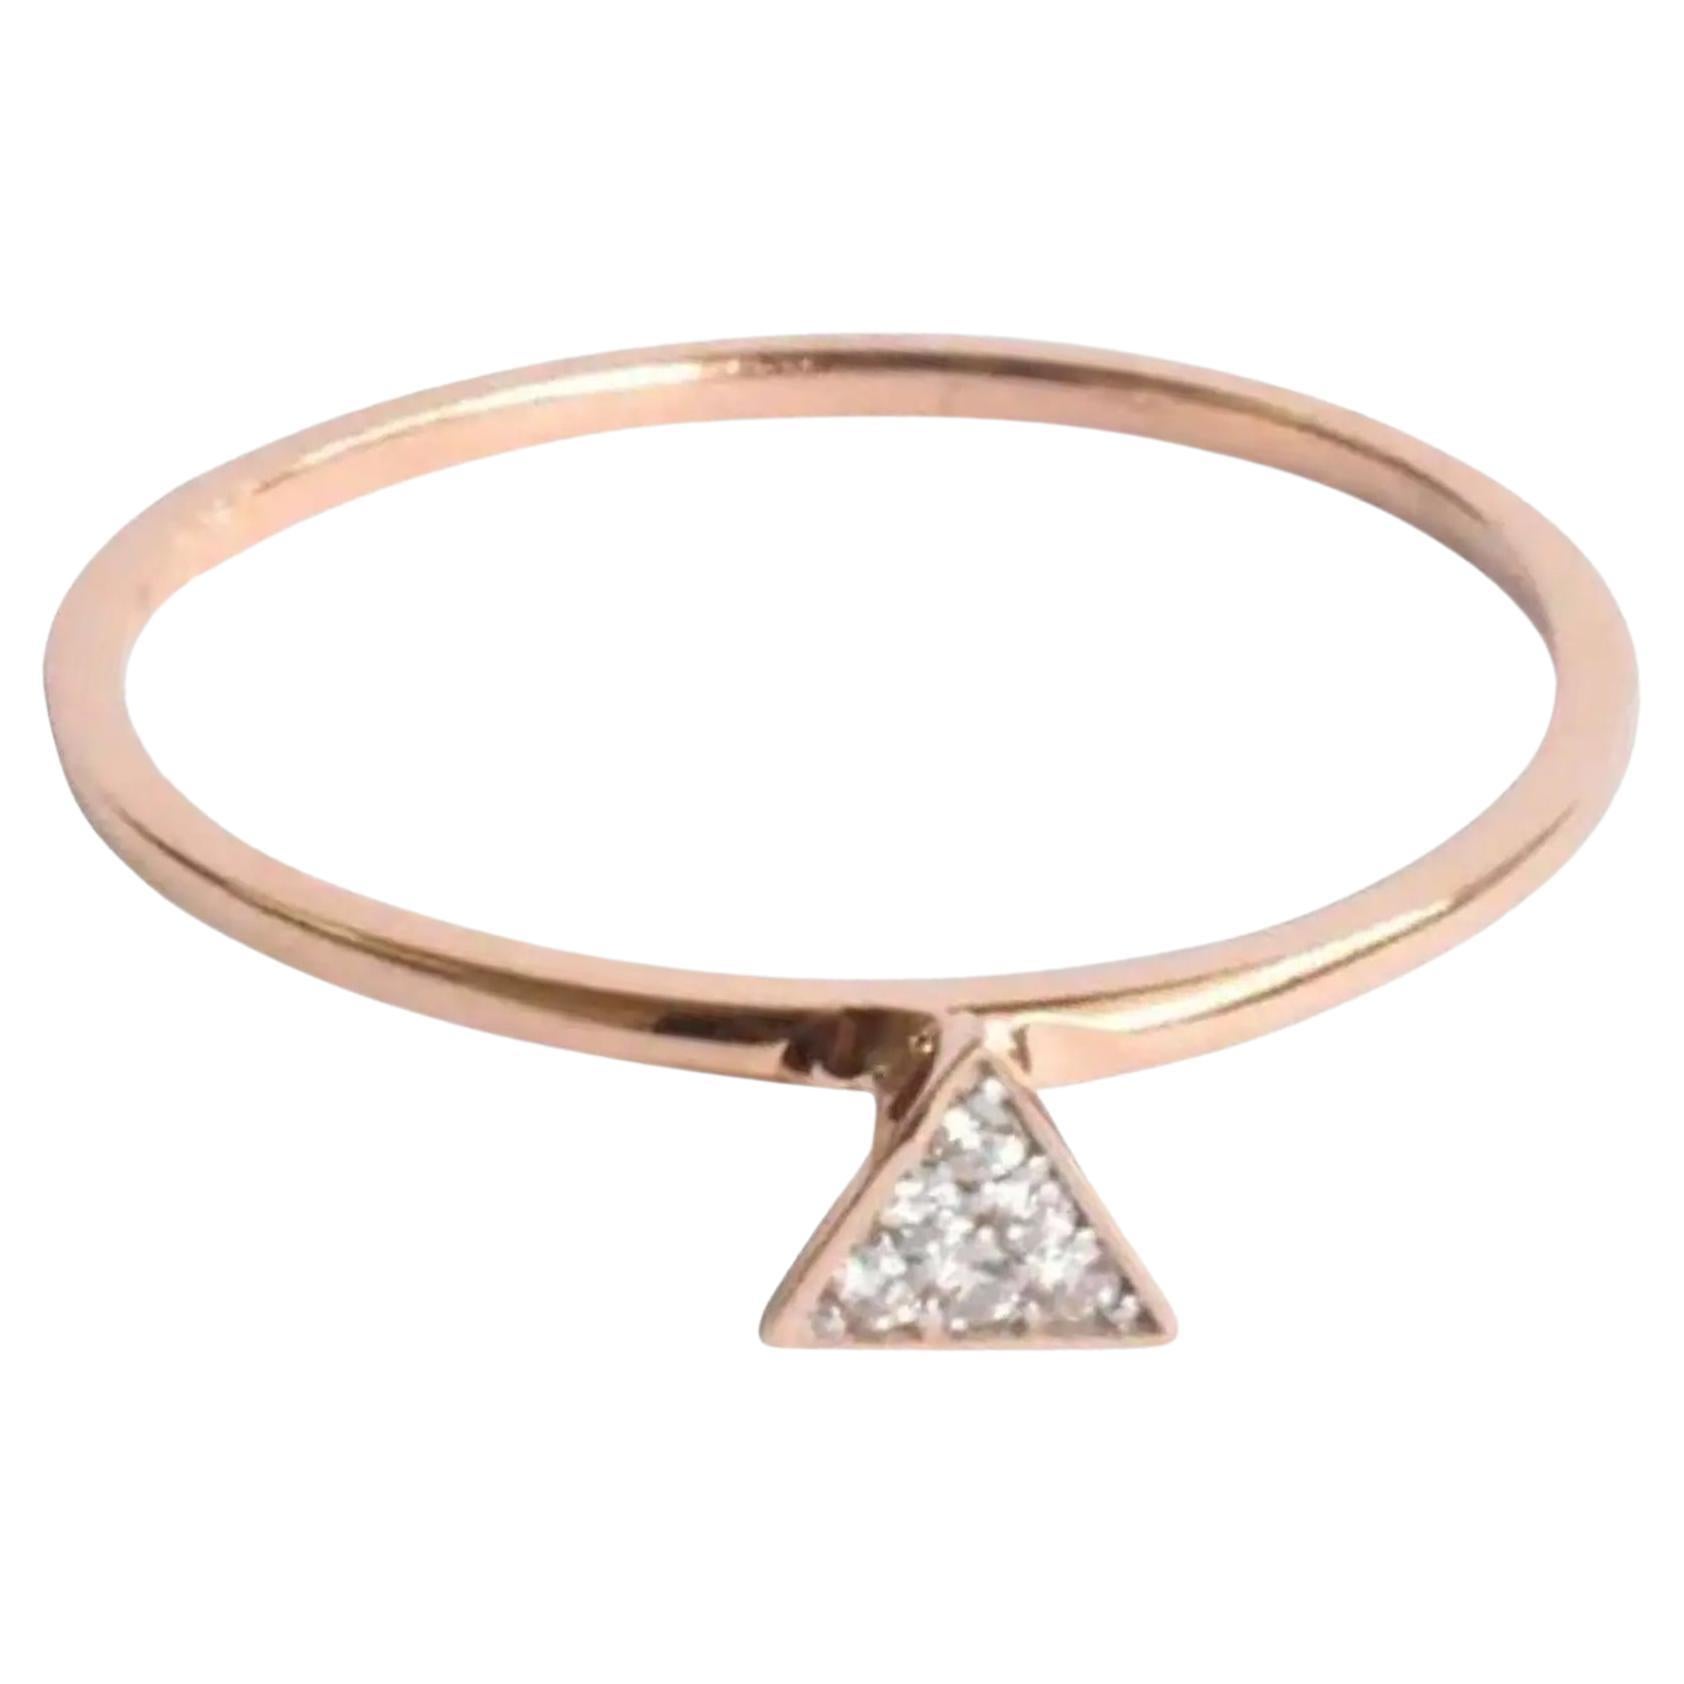 For Sale:  18k Gold Triangle Stacking Ring with White Pave Diamonds Minimalist Ring